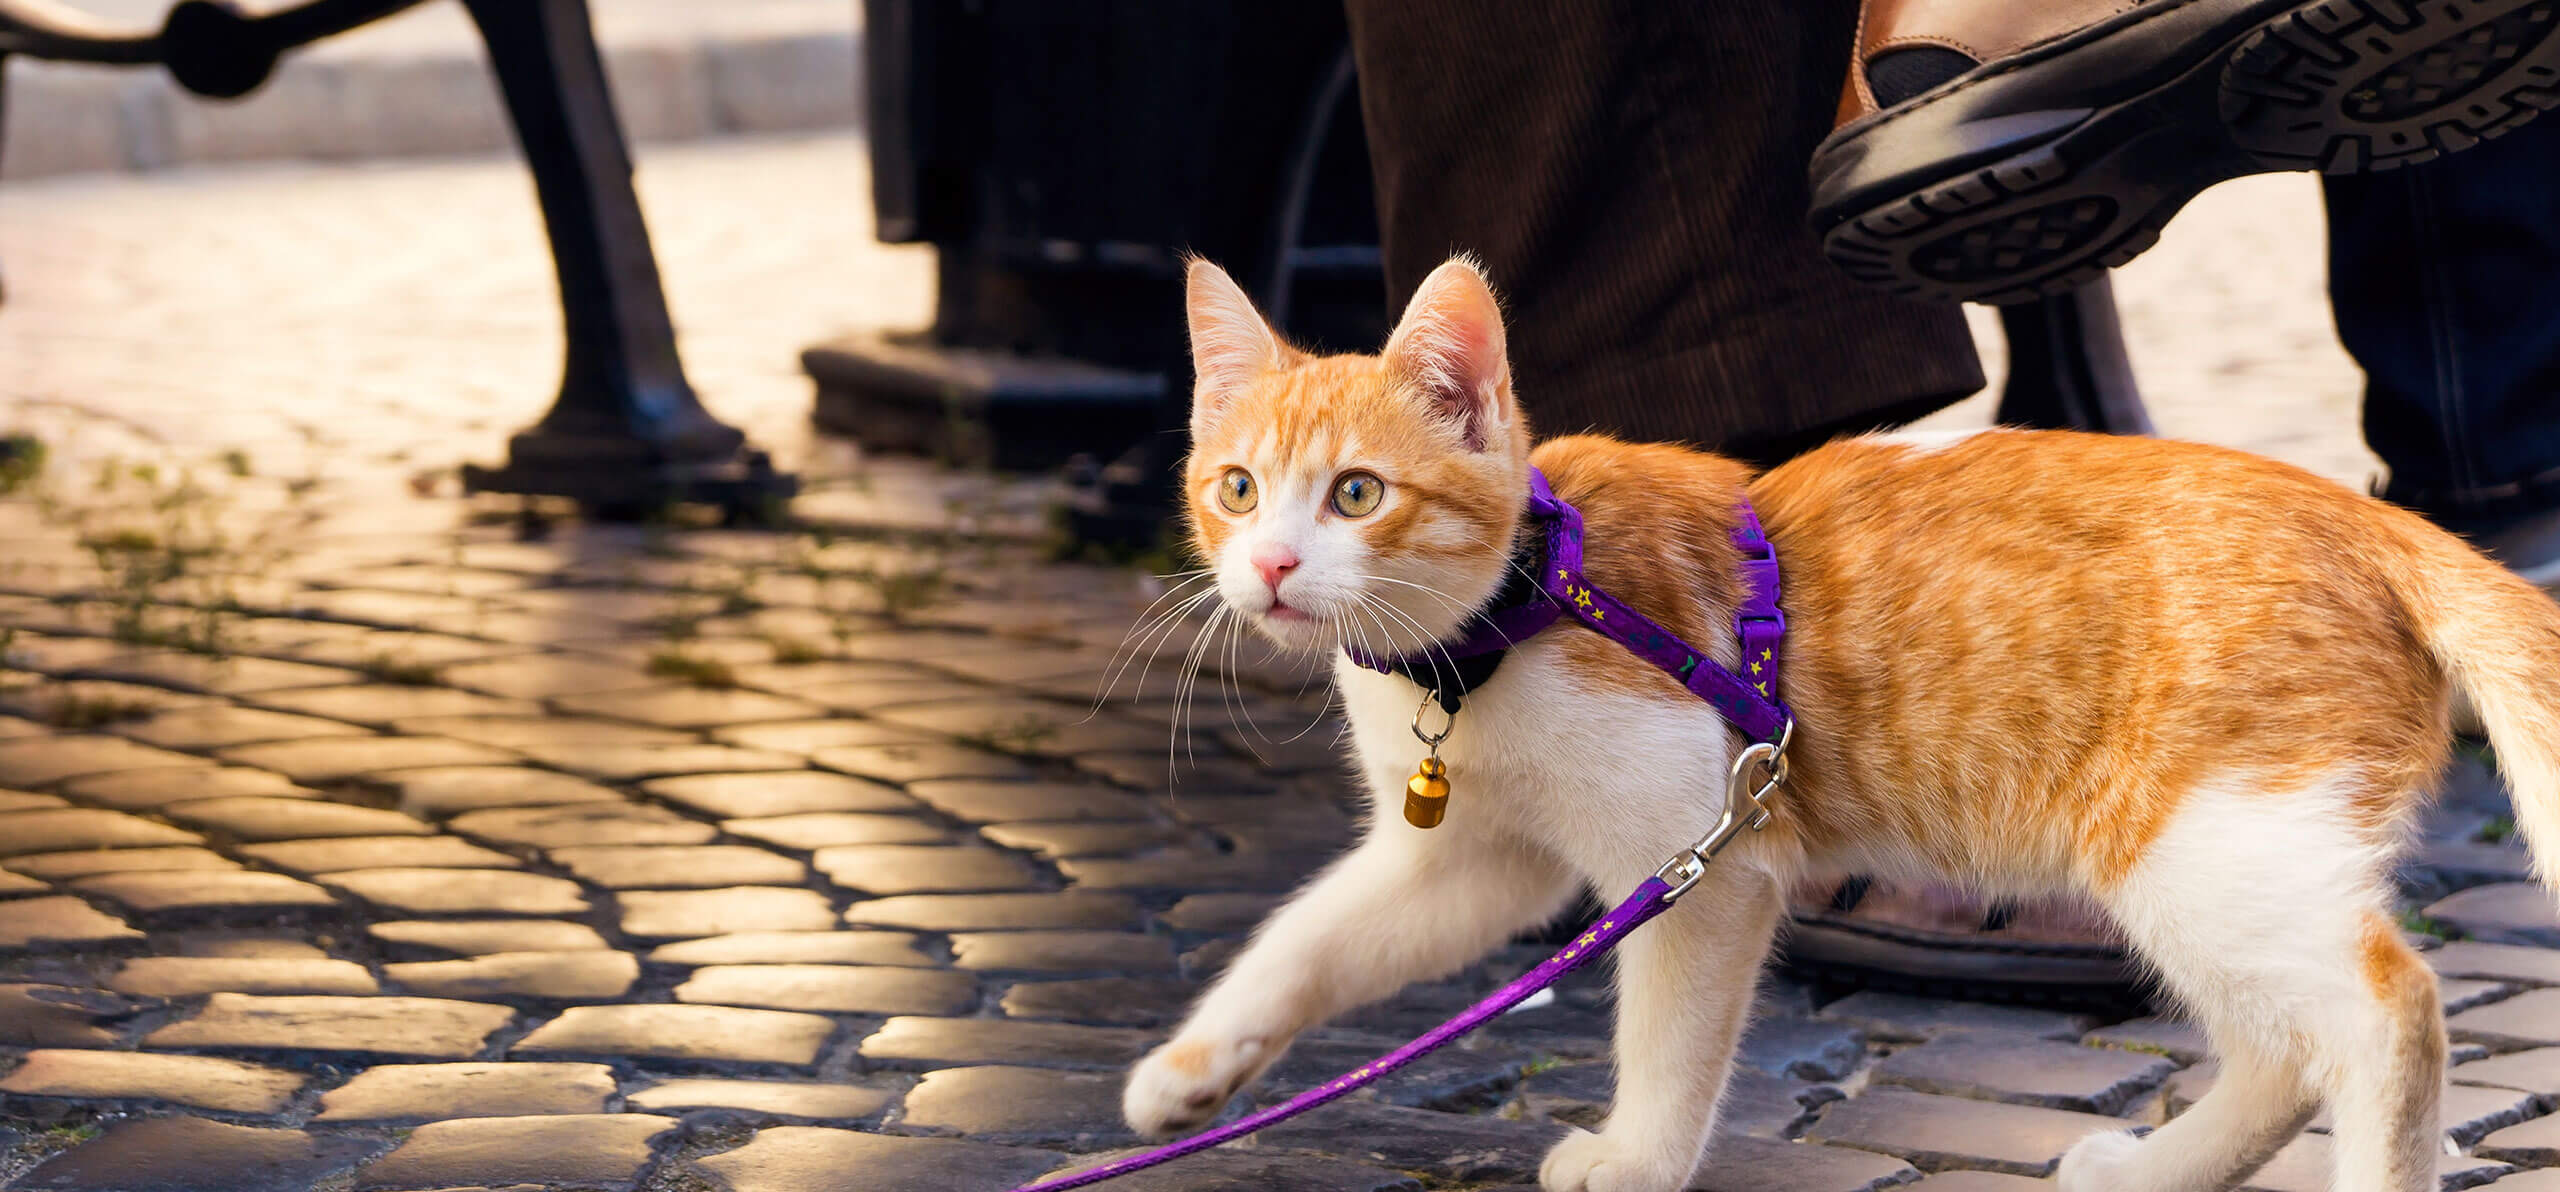 orange cat leashed with a harness walking over cobblestone